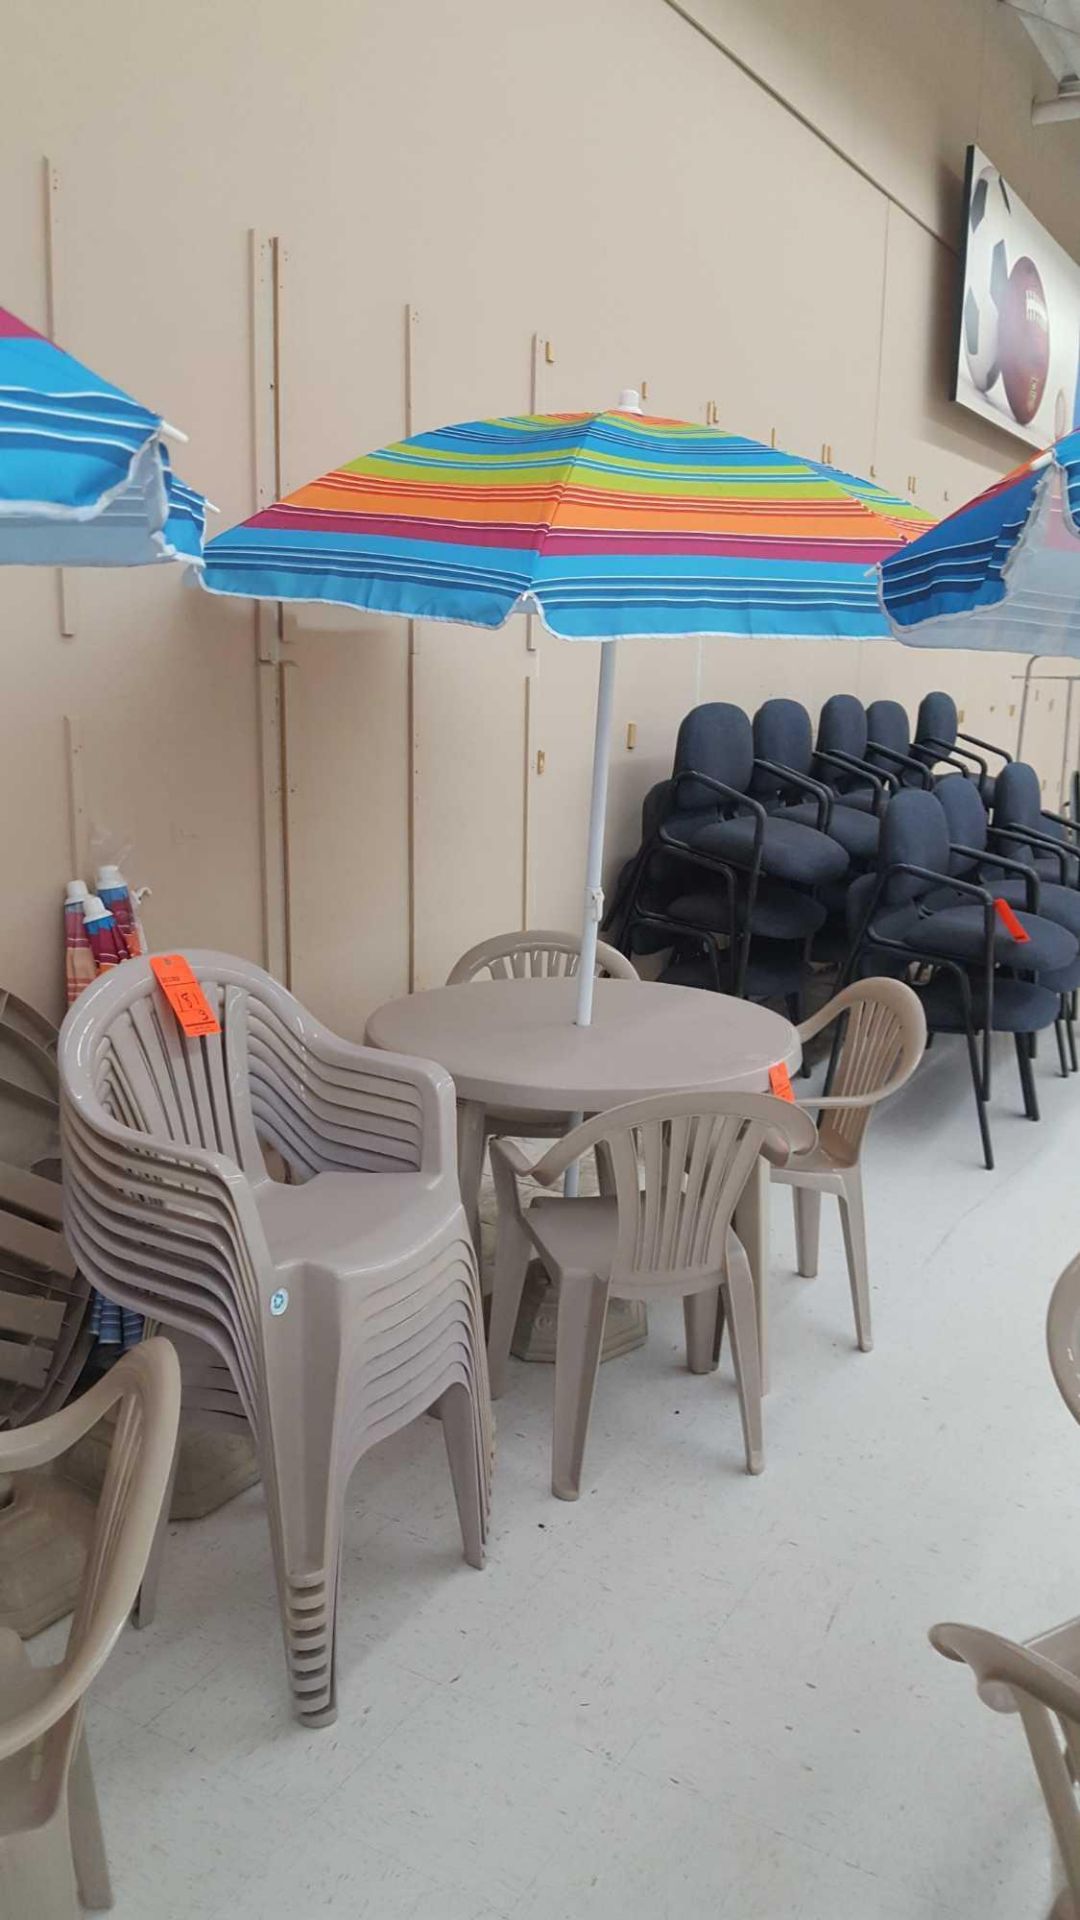 Patio furniture lot - includes (3) resin tables, (12) resin stacking chairs, (3) umbrellas, and (